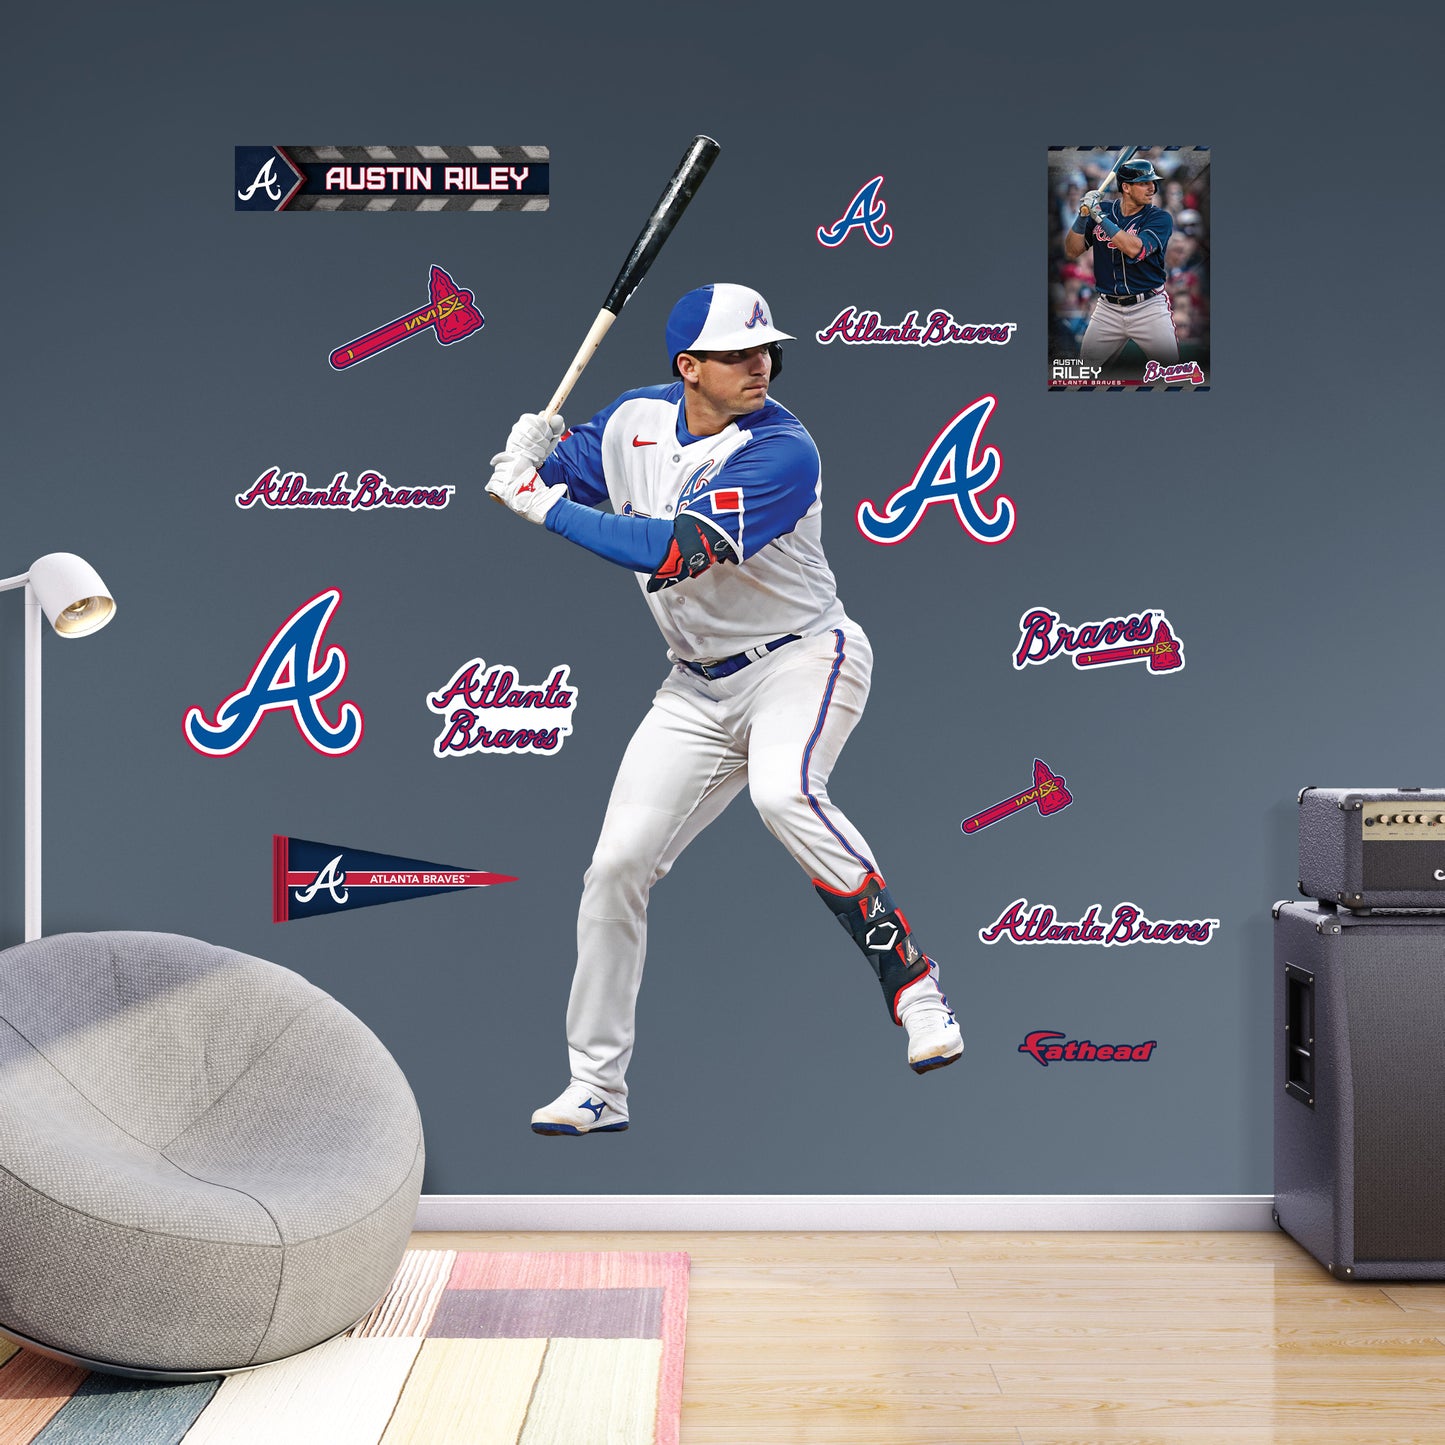 Atlanta Braves: Matt Olson 2022 Life-Size Foam Core Cutout - Officially  Licensed MLB Stand Out